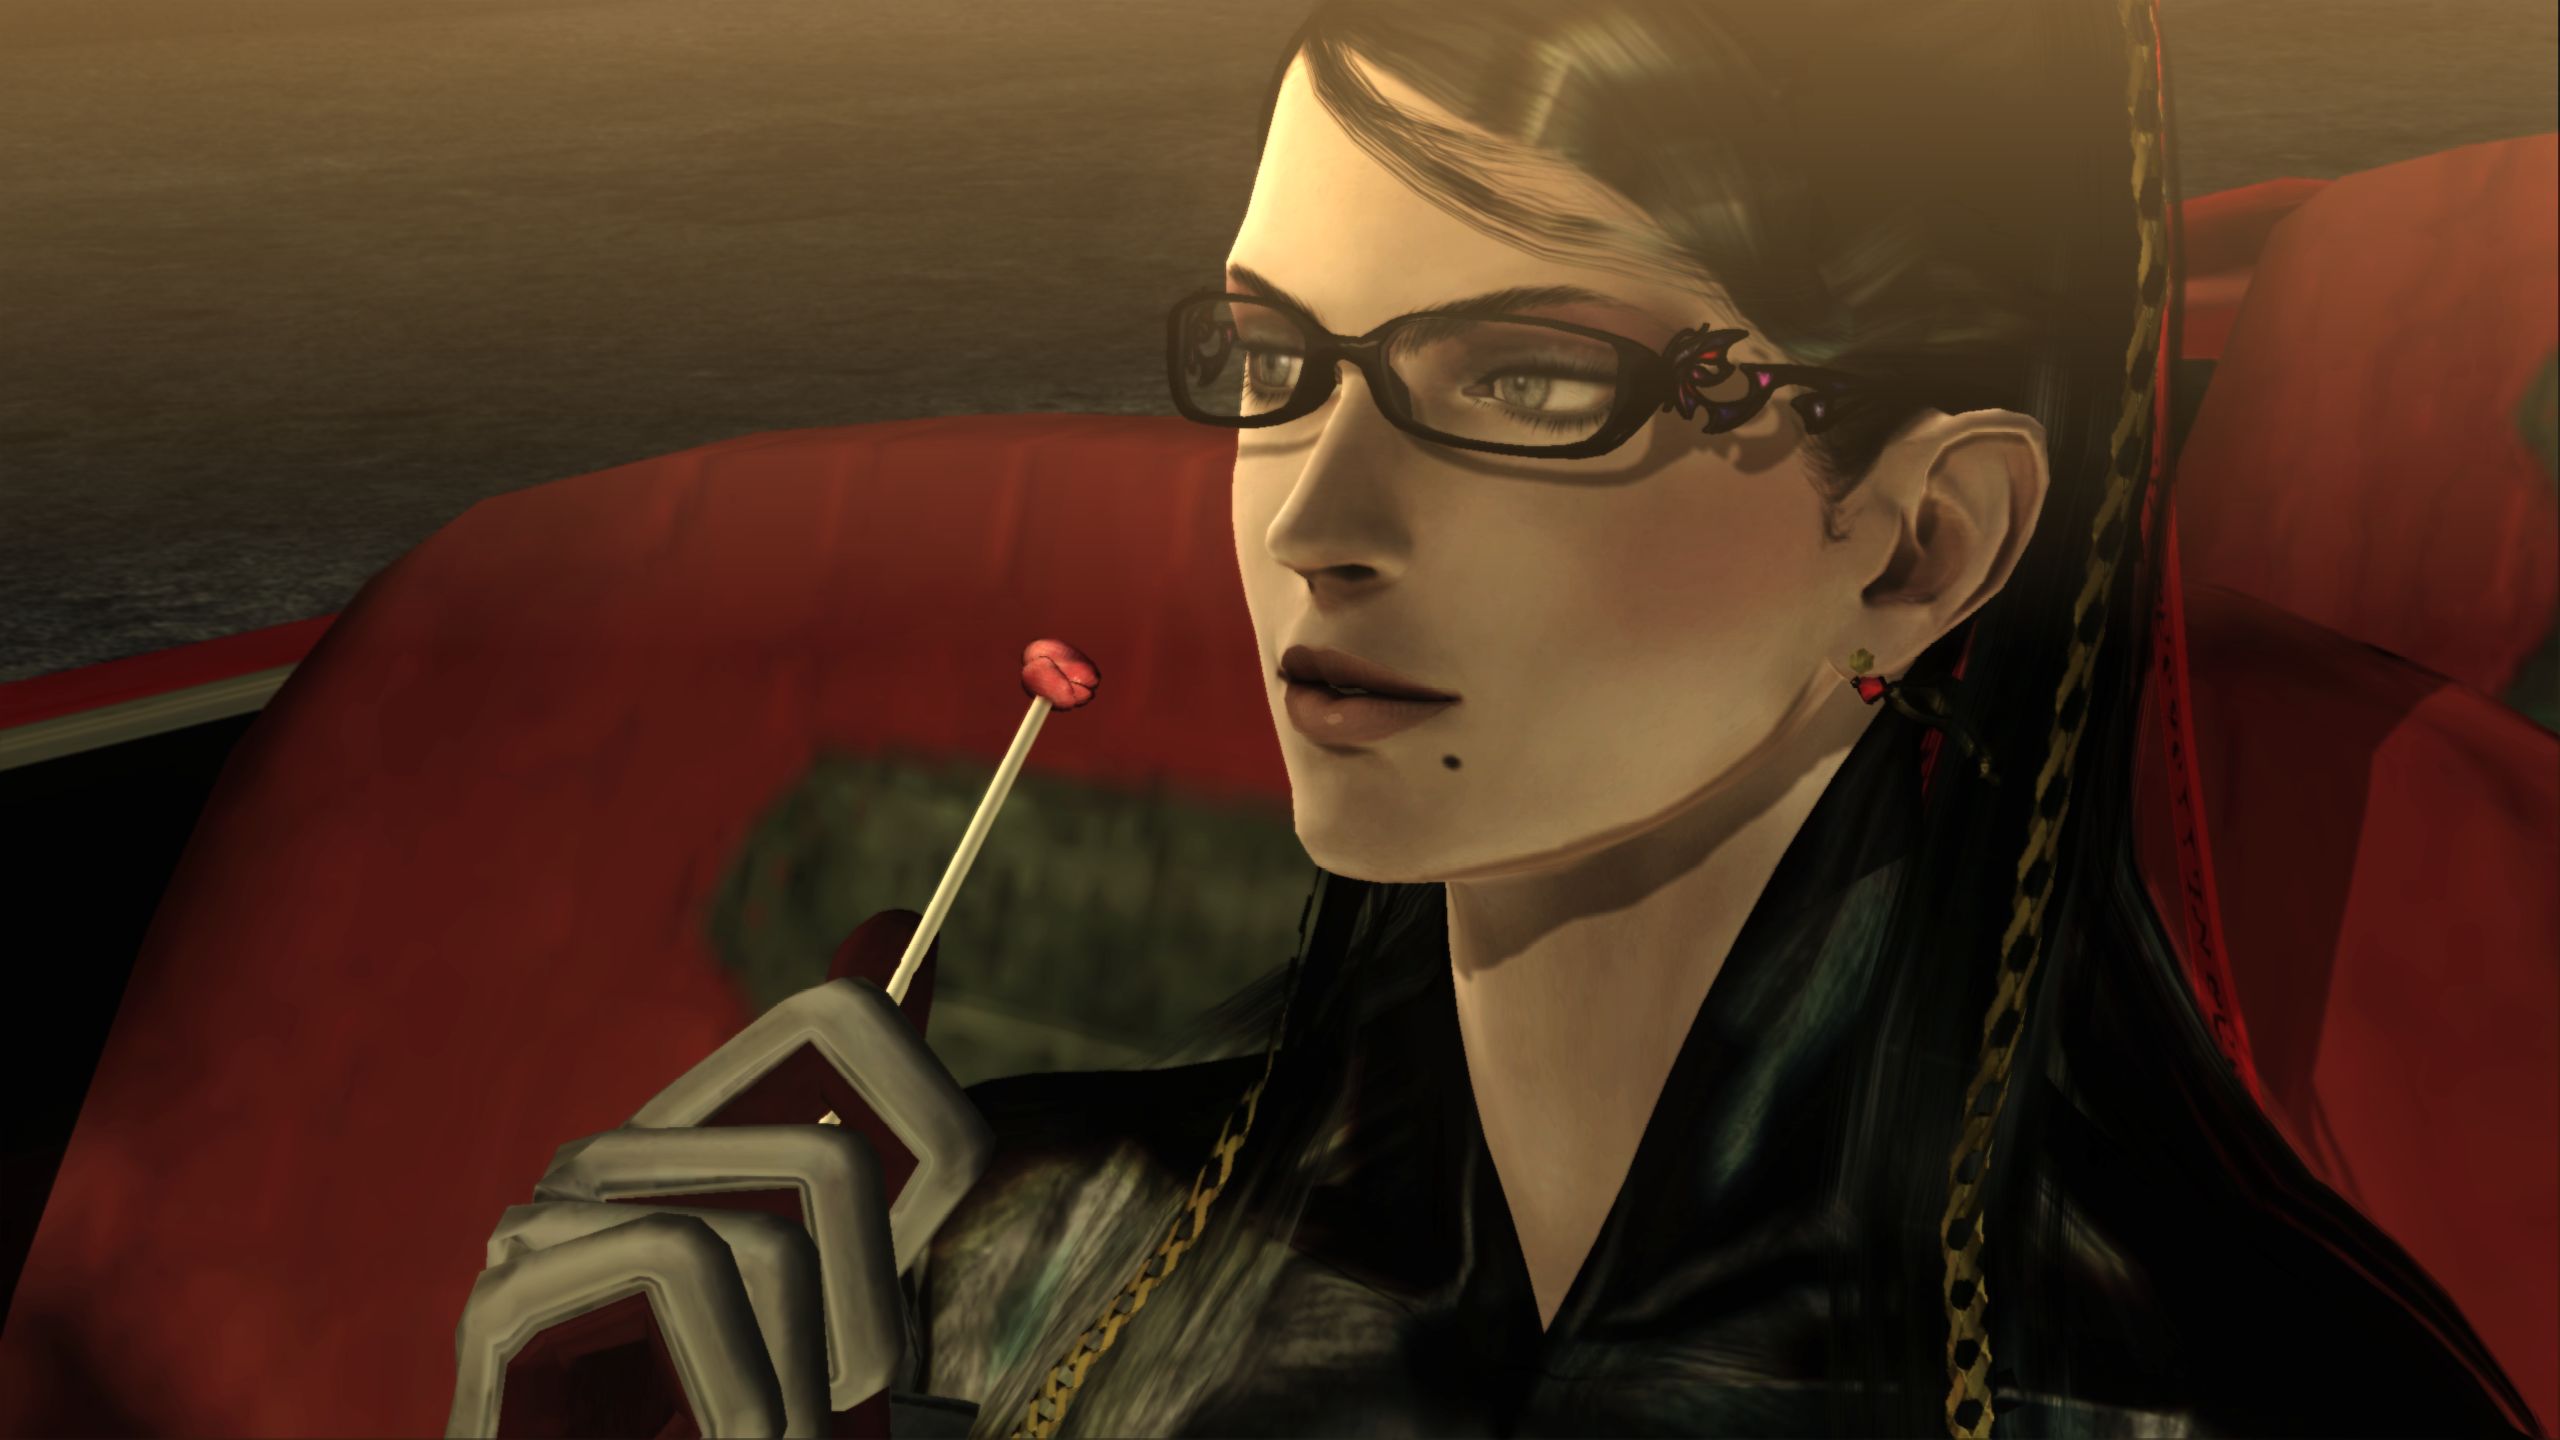  Bayonetta voice actress urges players to boycott next game, citing insulting treatment by developer Platinum 